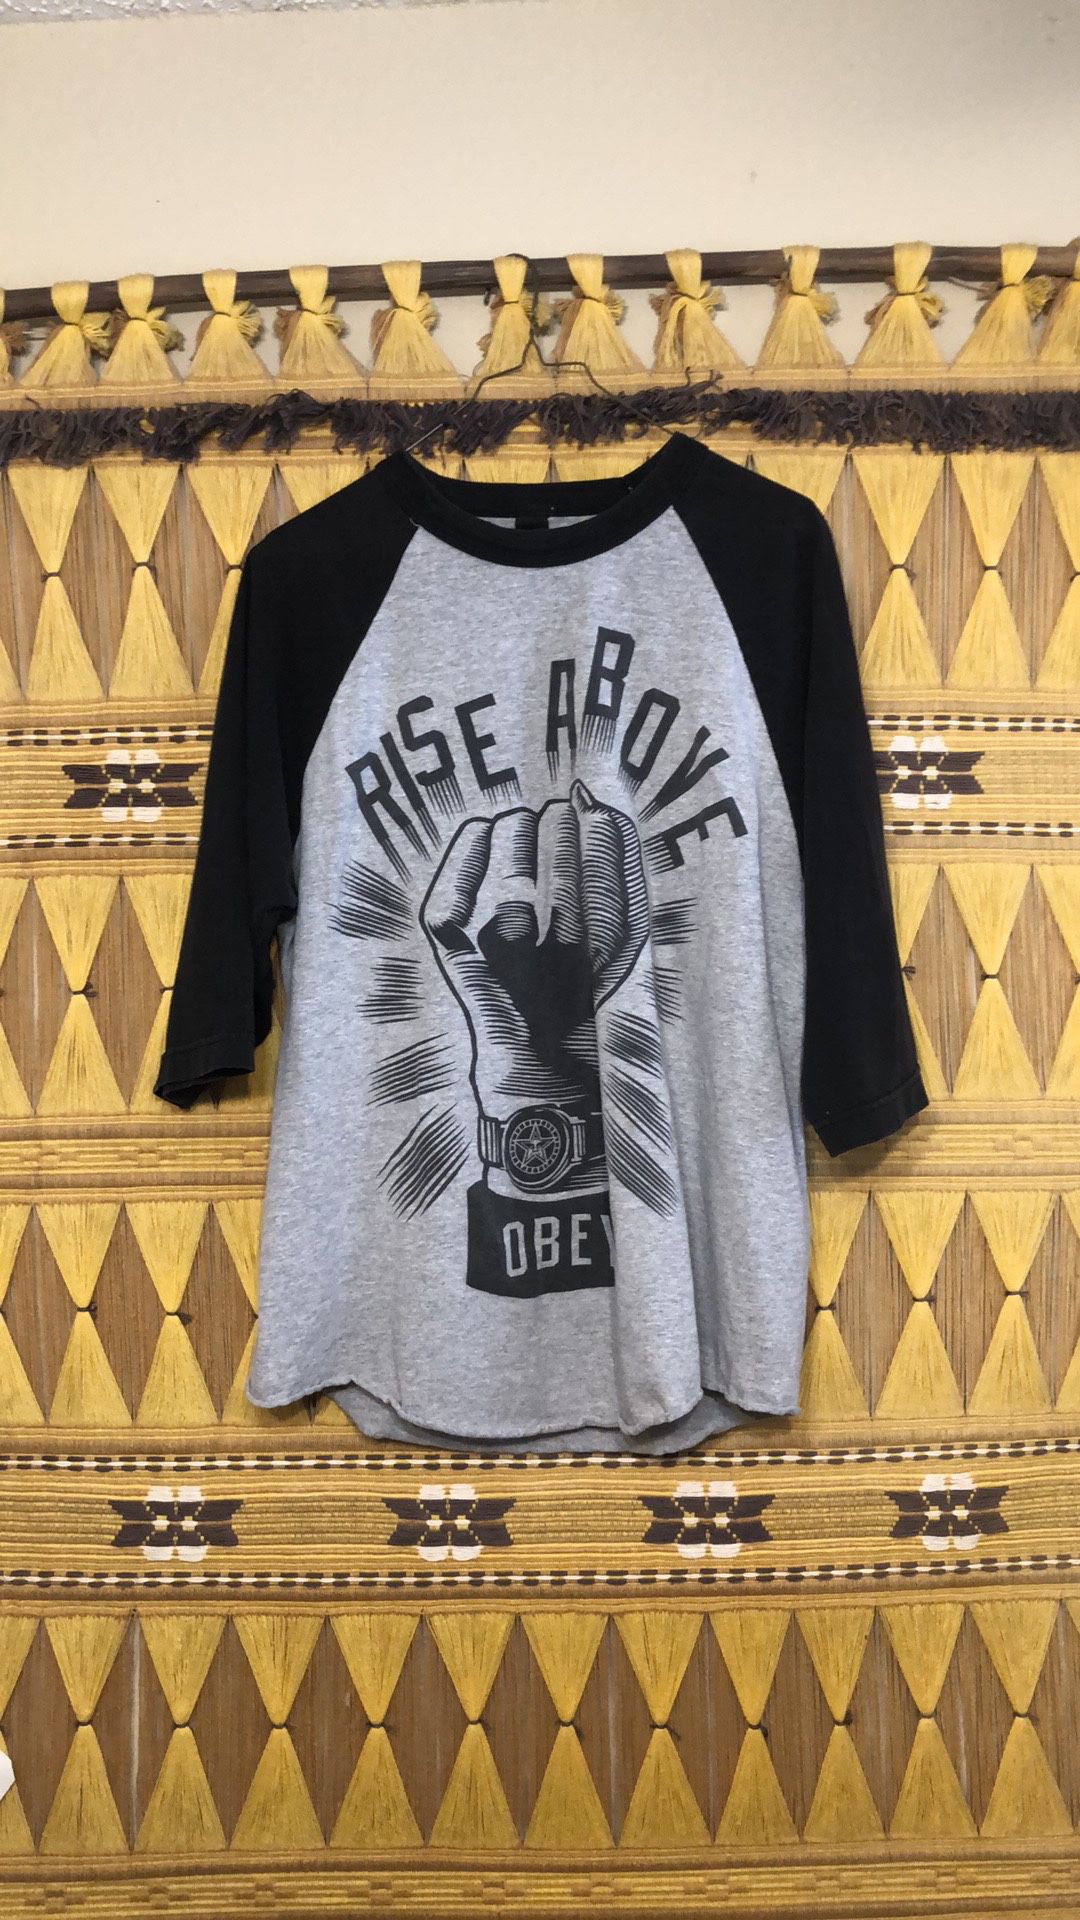 Large used obey rise above raglan baseball shirt used heavily but fair/ good condition me s tee obey rise above shirt size large gray with black mediu